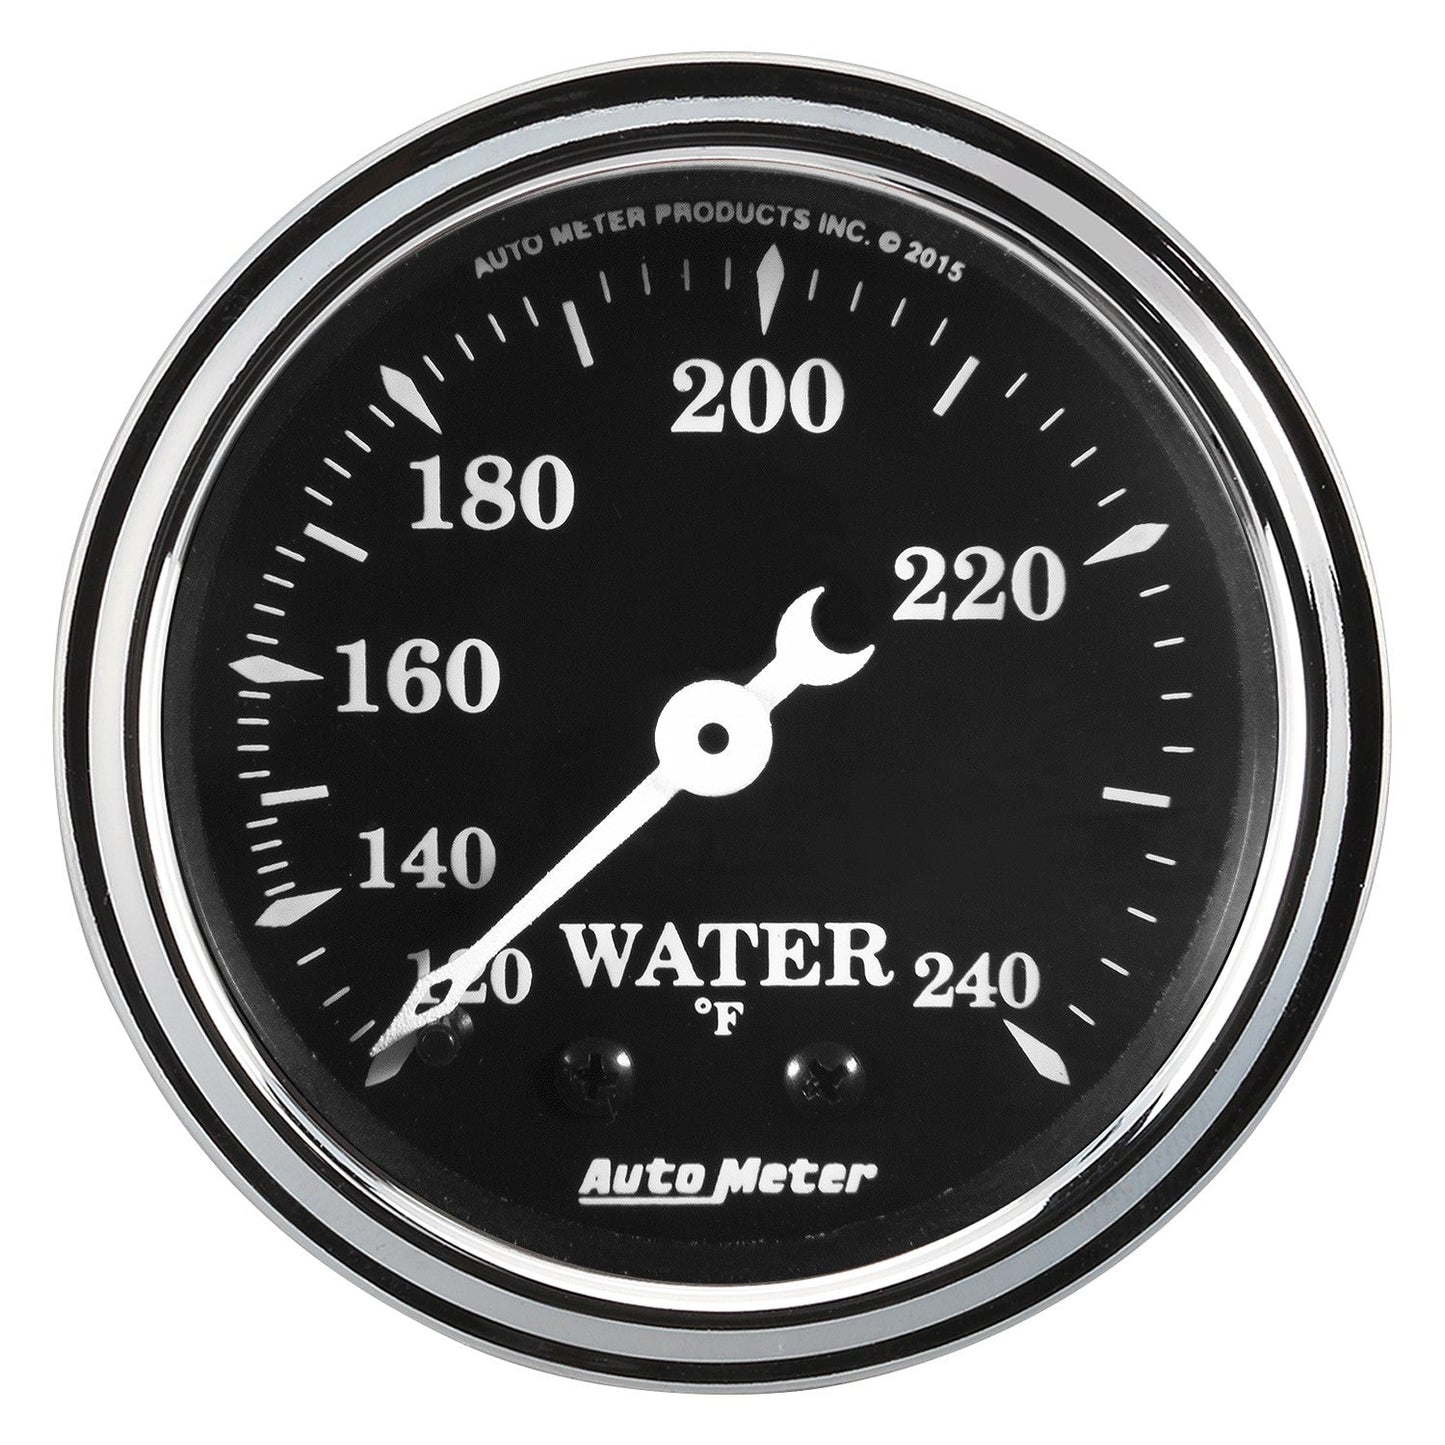 AutoMeter - 2-1/16" WATER TEMP, 120-240 °F, 6 FT., MECHANICAL, OLD TYME BLACK (1733)